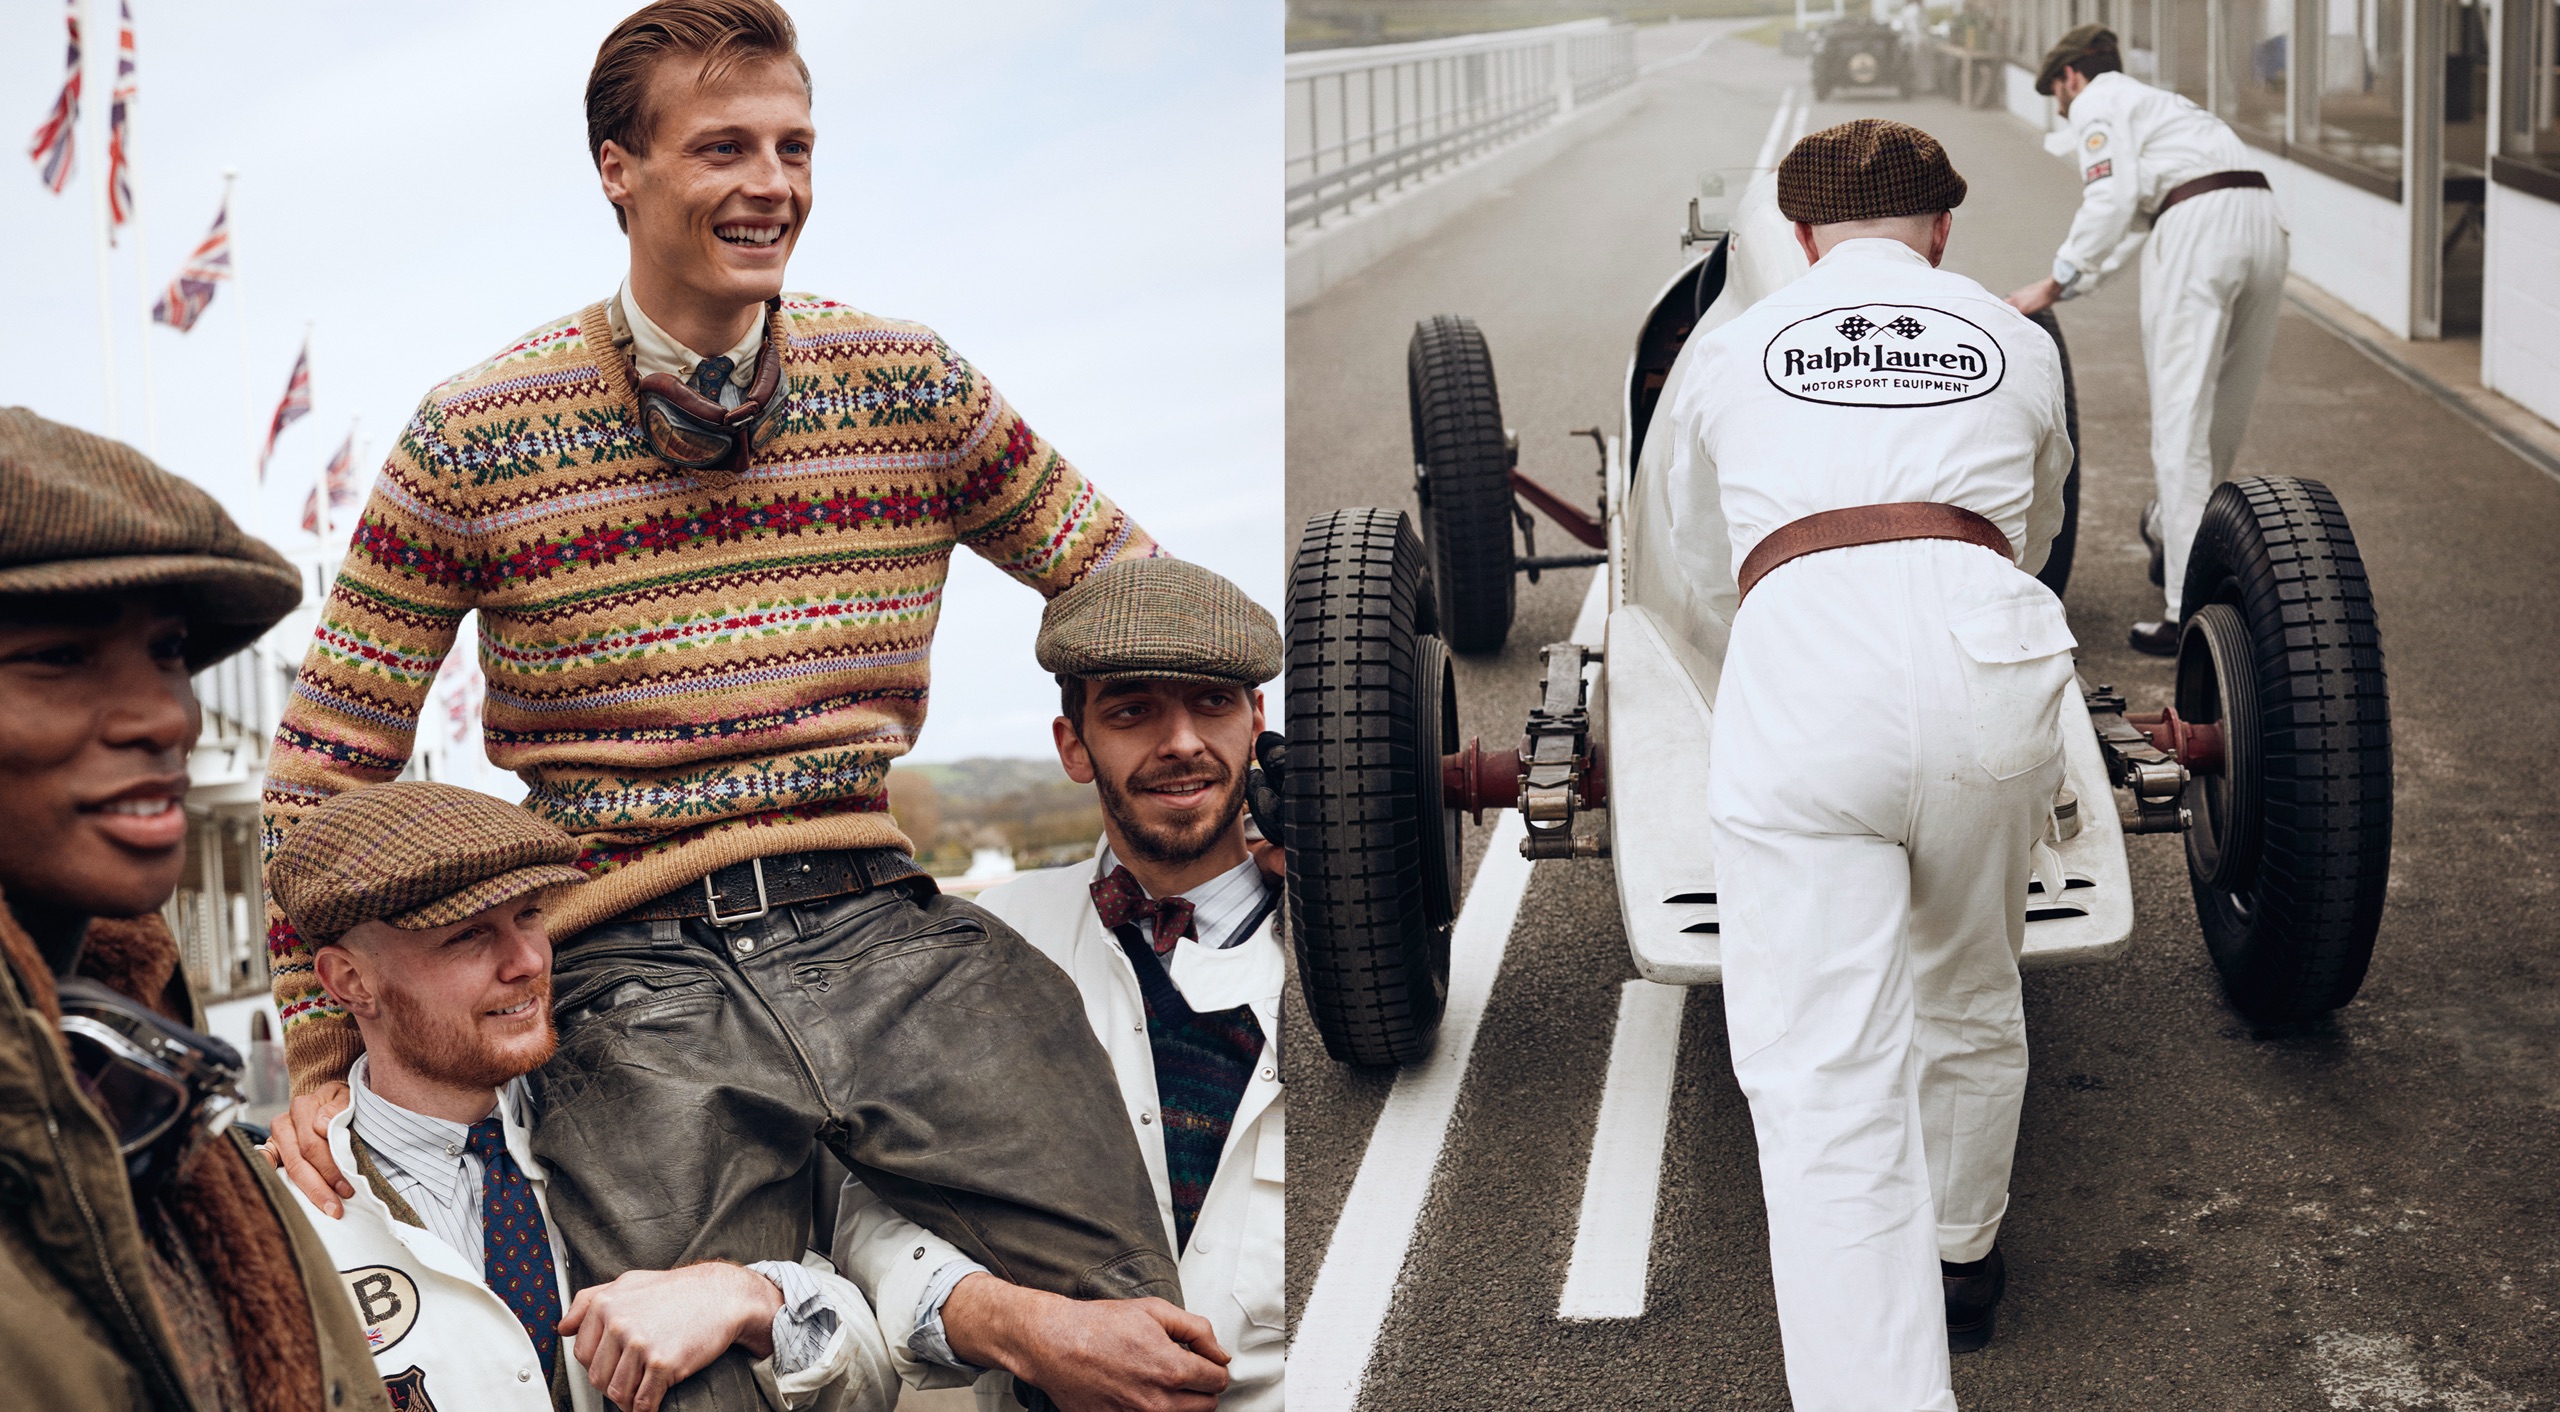 <strong>ON LOCATION</strong><br/><span>This season of Polo Originals, inspired by the golden era of Grand Prix car racing, was photographed at the Goodwood Motor Circuit, which is located in West Sussex, on the 12,000-acre Goodwood Estate. The Circuit has since become known for hosting a number of prestigious motorsport events, including the famous Festival of Speed and Revival.</span> <br/><rlmag_link href="https://www.ralphlauren.global/pa/en/search?cgid=brands-prl-tough-and-refined-cg"><button class="shop-collection">Shop the Story</button></rlmag_link>